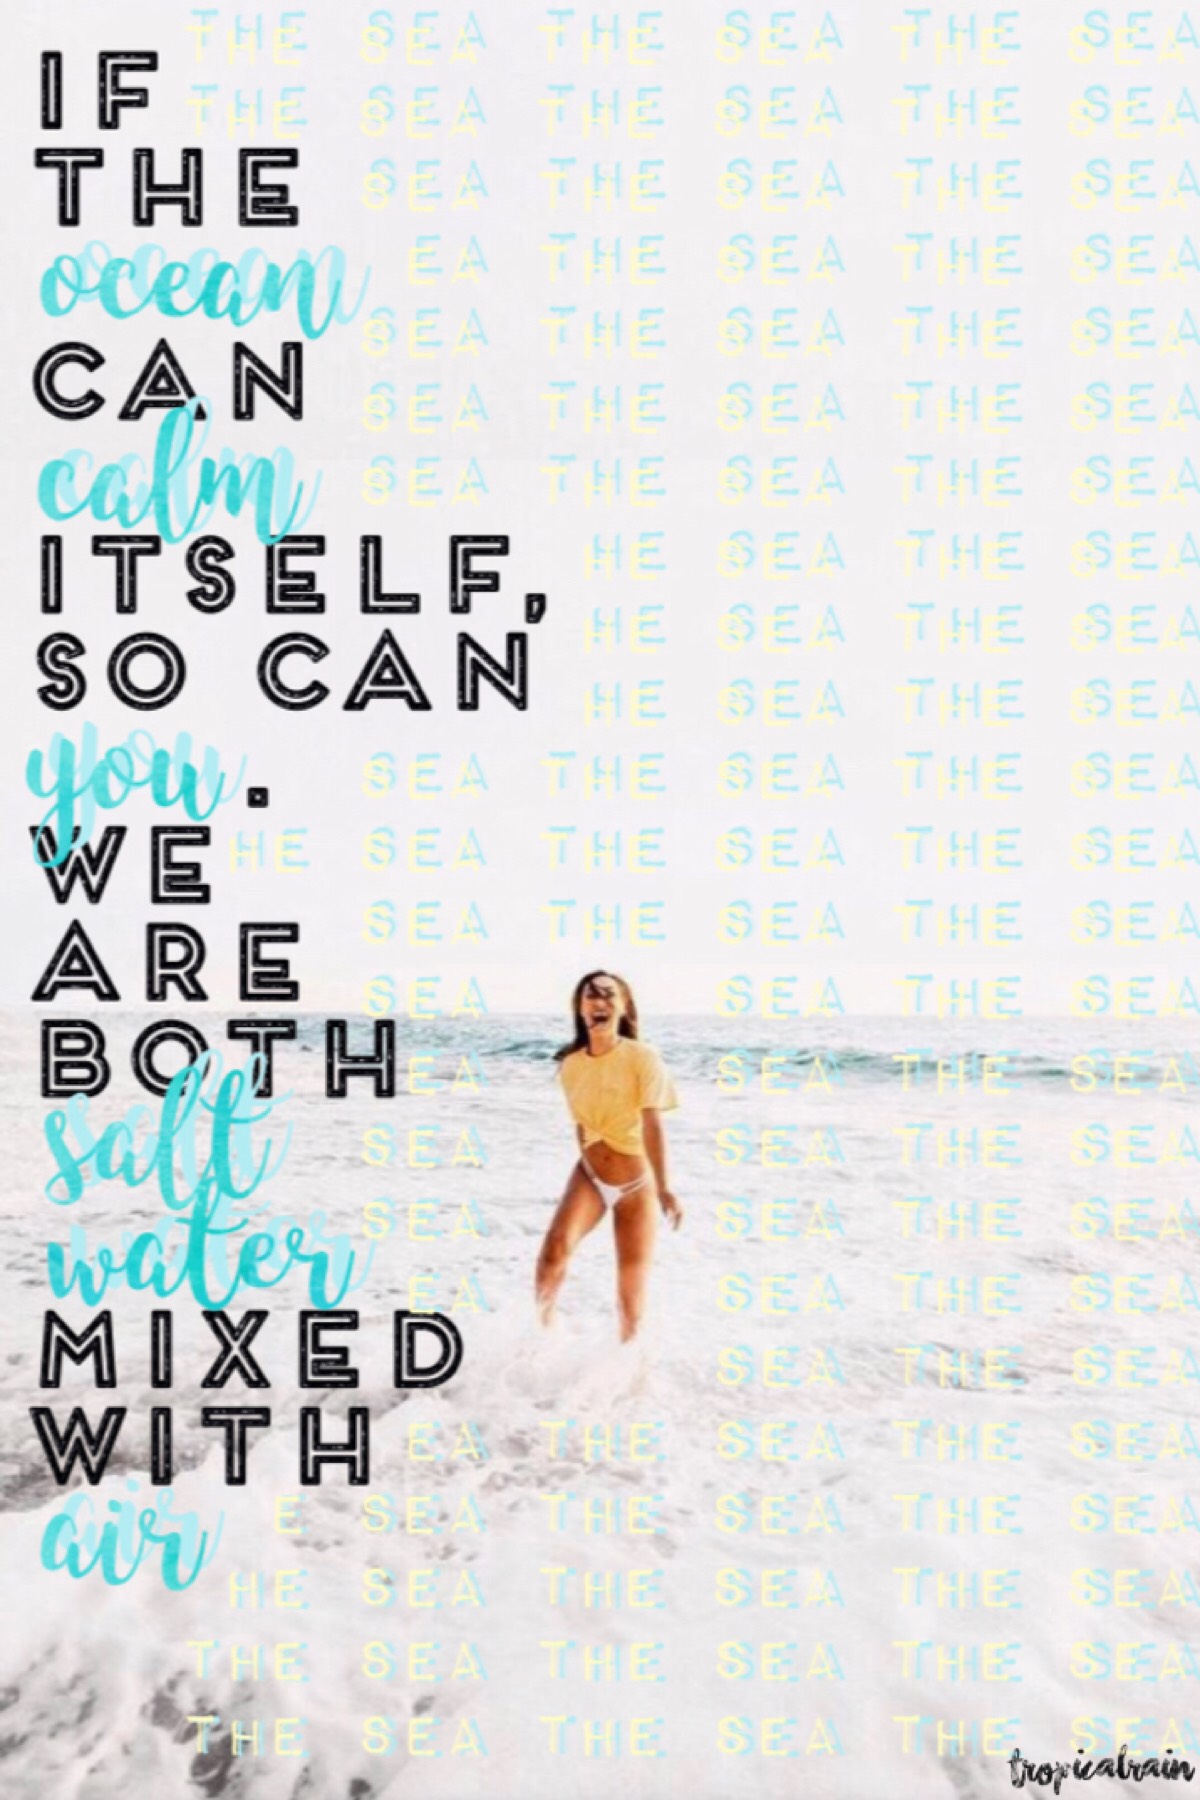 🌊 t a p 🌊
the text took way more time than I expected it would😂 I think this turned out well
I’m like obsessed with this photo for some reason😂 it’s just so aesthetically pleasing and stuff
QOTD: um... do you ever get crashed by a wave at the beach?
AOTD: